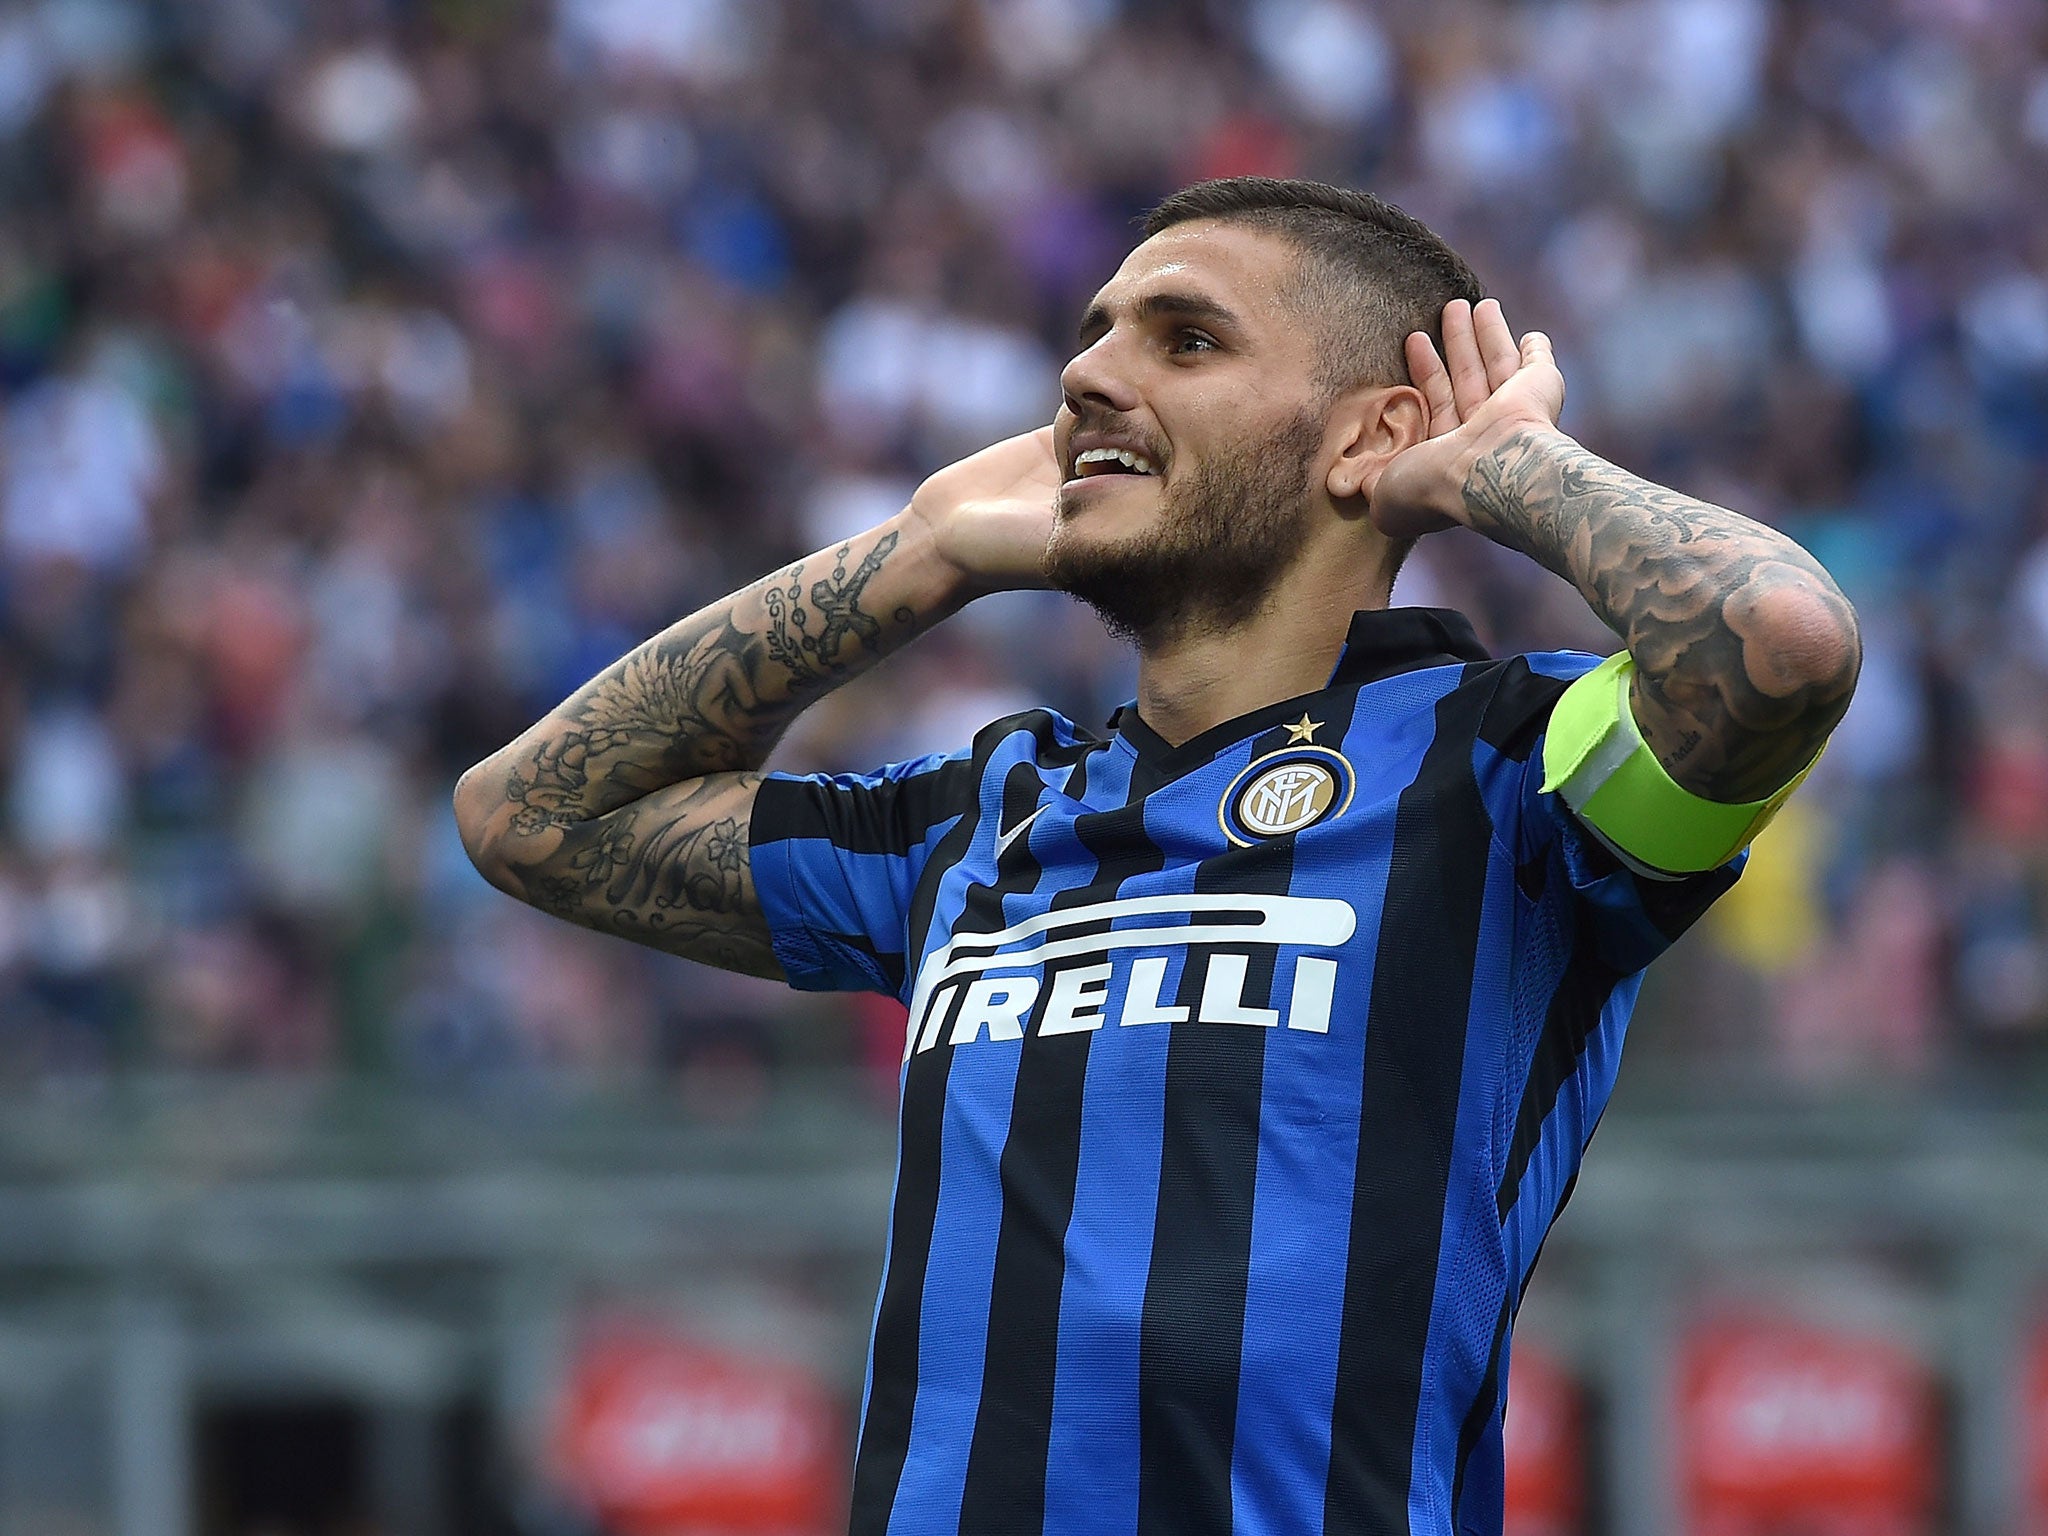 Arsenal have turned their attention to Inter Milan's Icardi